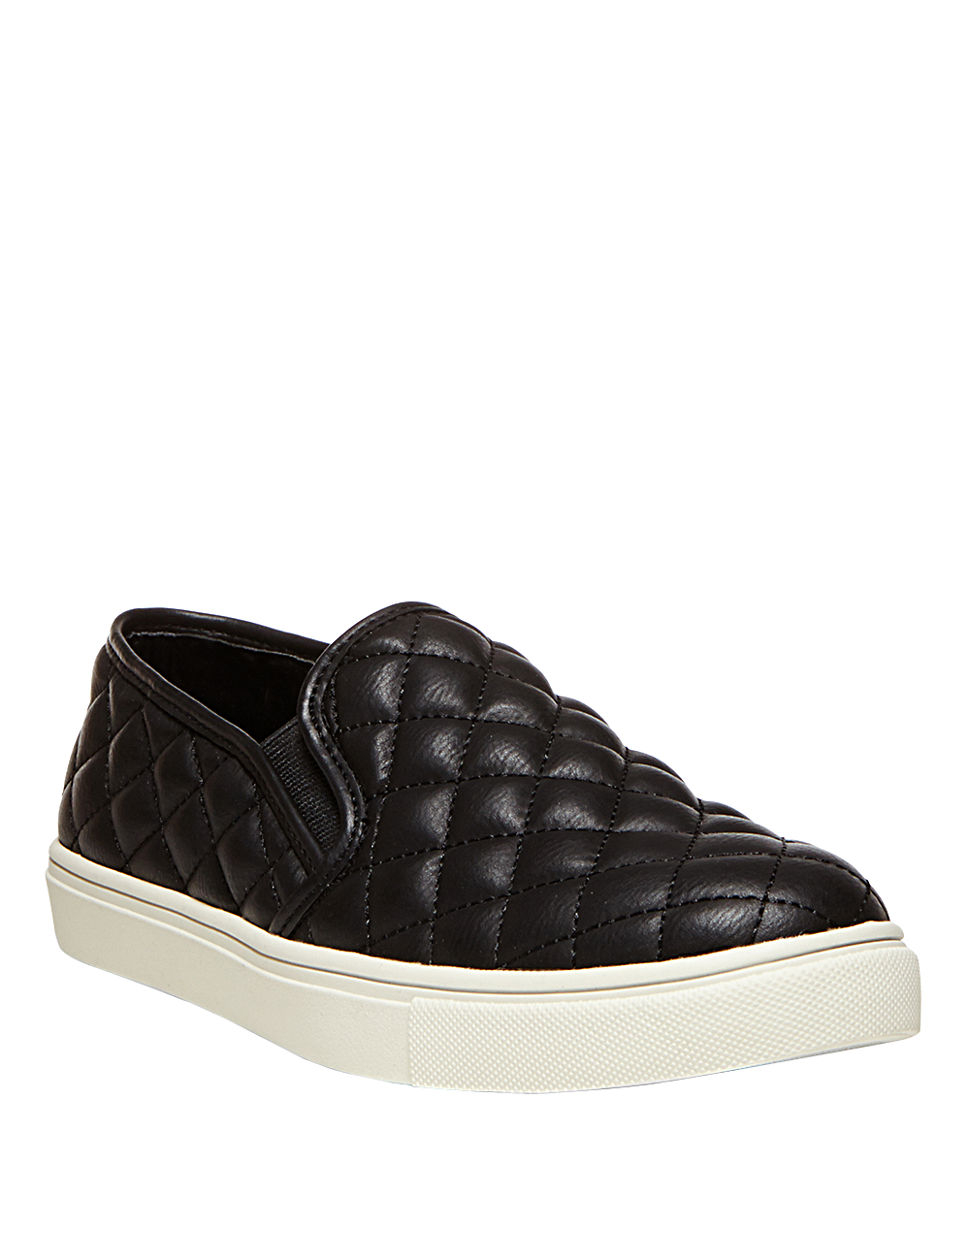 Steve Madden Ecentrcq Quilted Faux Leather Slip-Ons in Black | Lyst